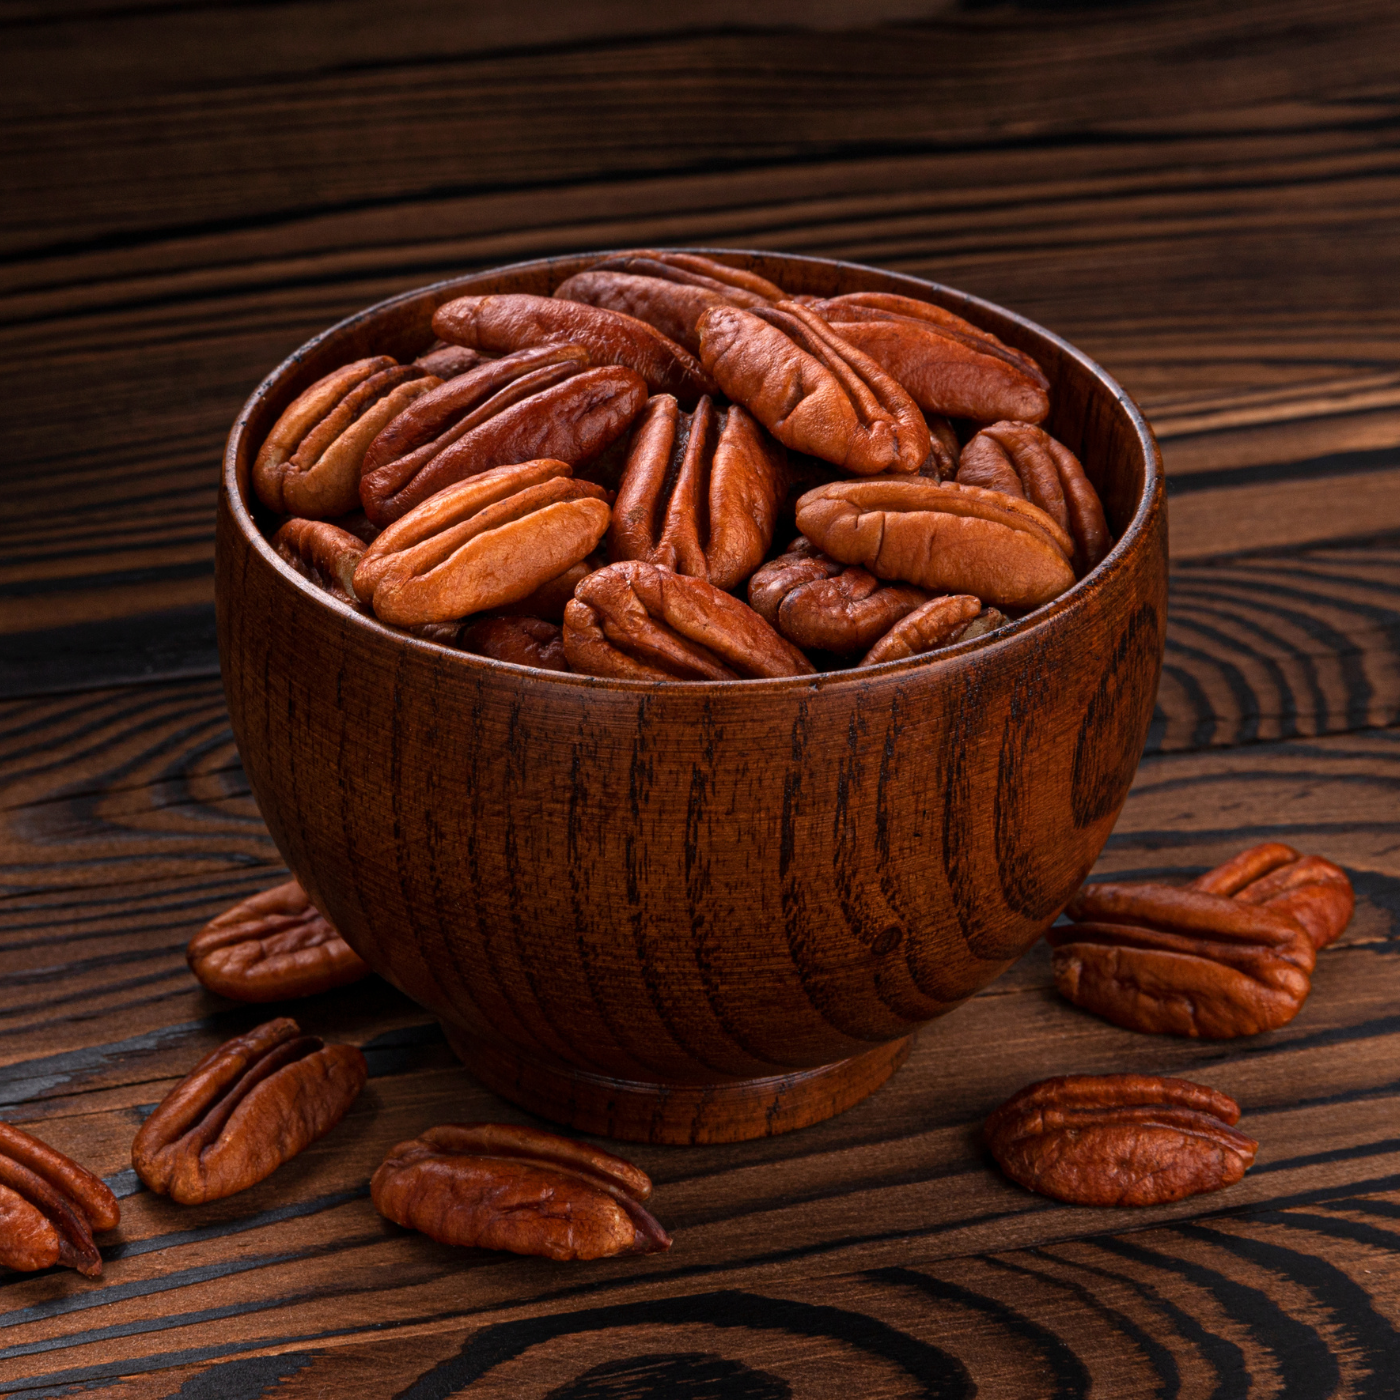 Pecans - The Party Nut You Didn't Know You Needed!